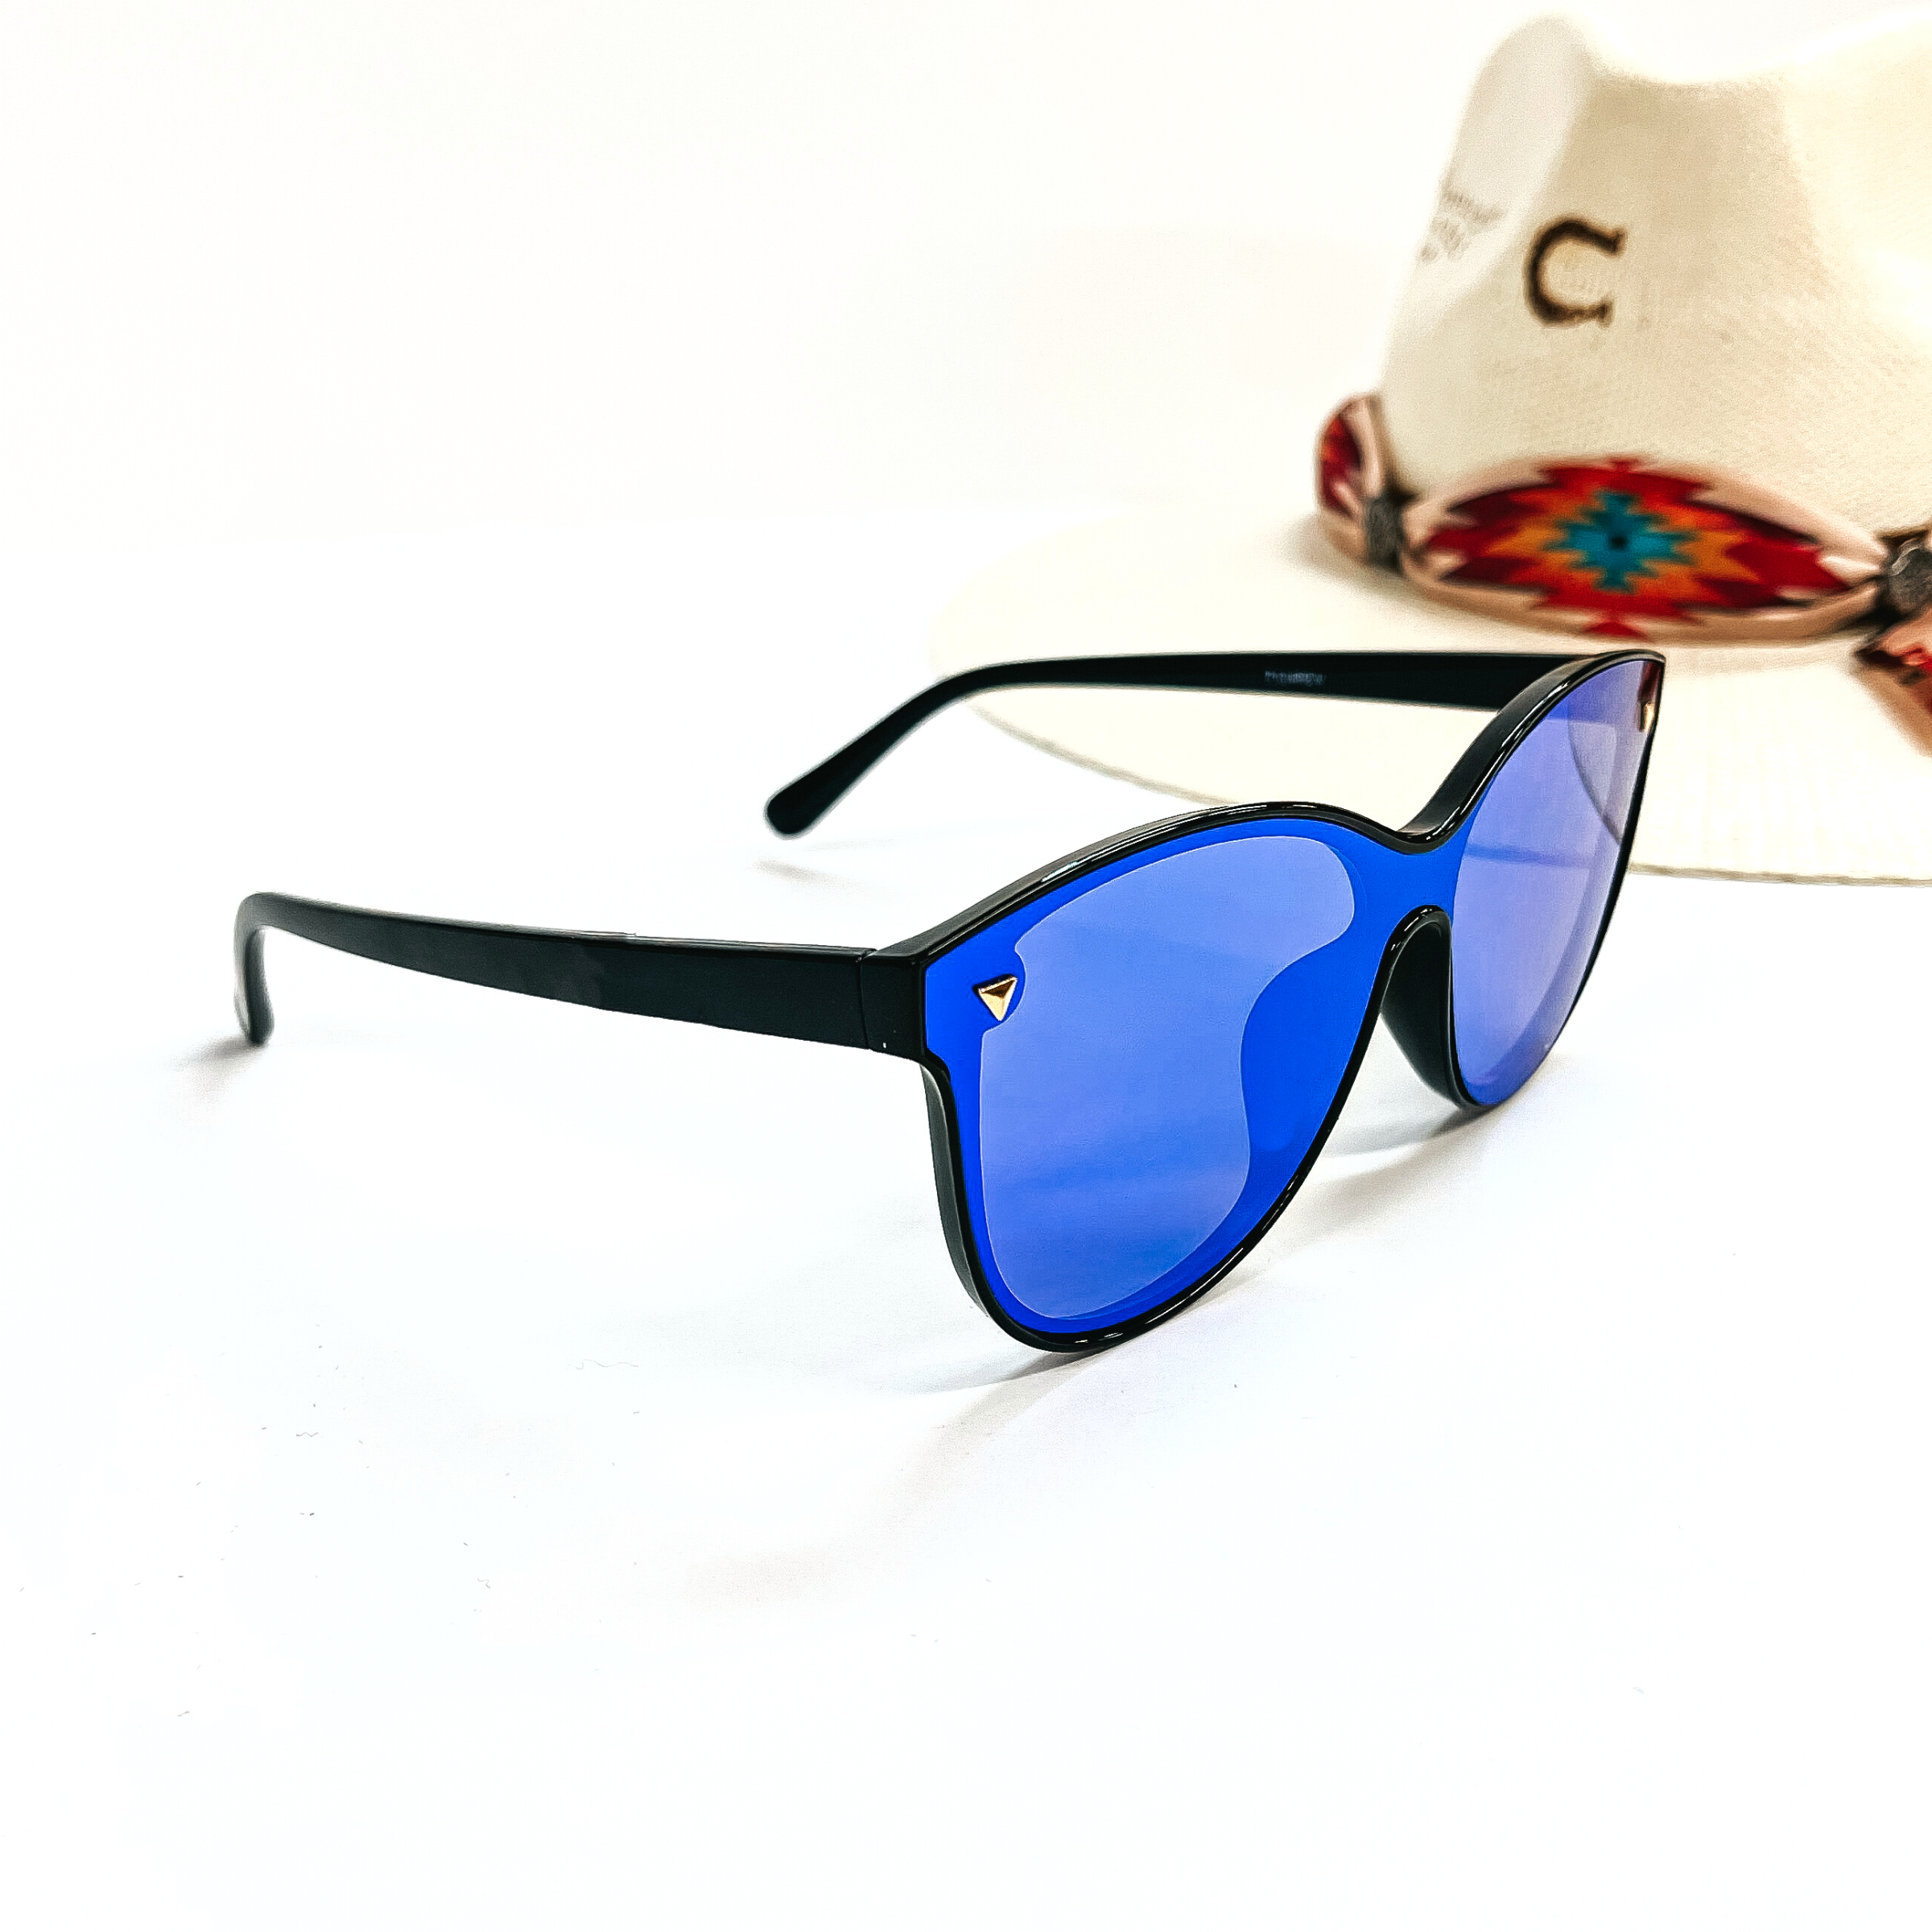 This is a pair of black frame sunglasses with a blue mirrored lense and silver tone  detailing. This pair of sunglasses are taken on a white background and an ivory straw hat  with a colorful aztec print hat band in the back as  decor.